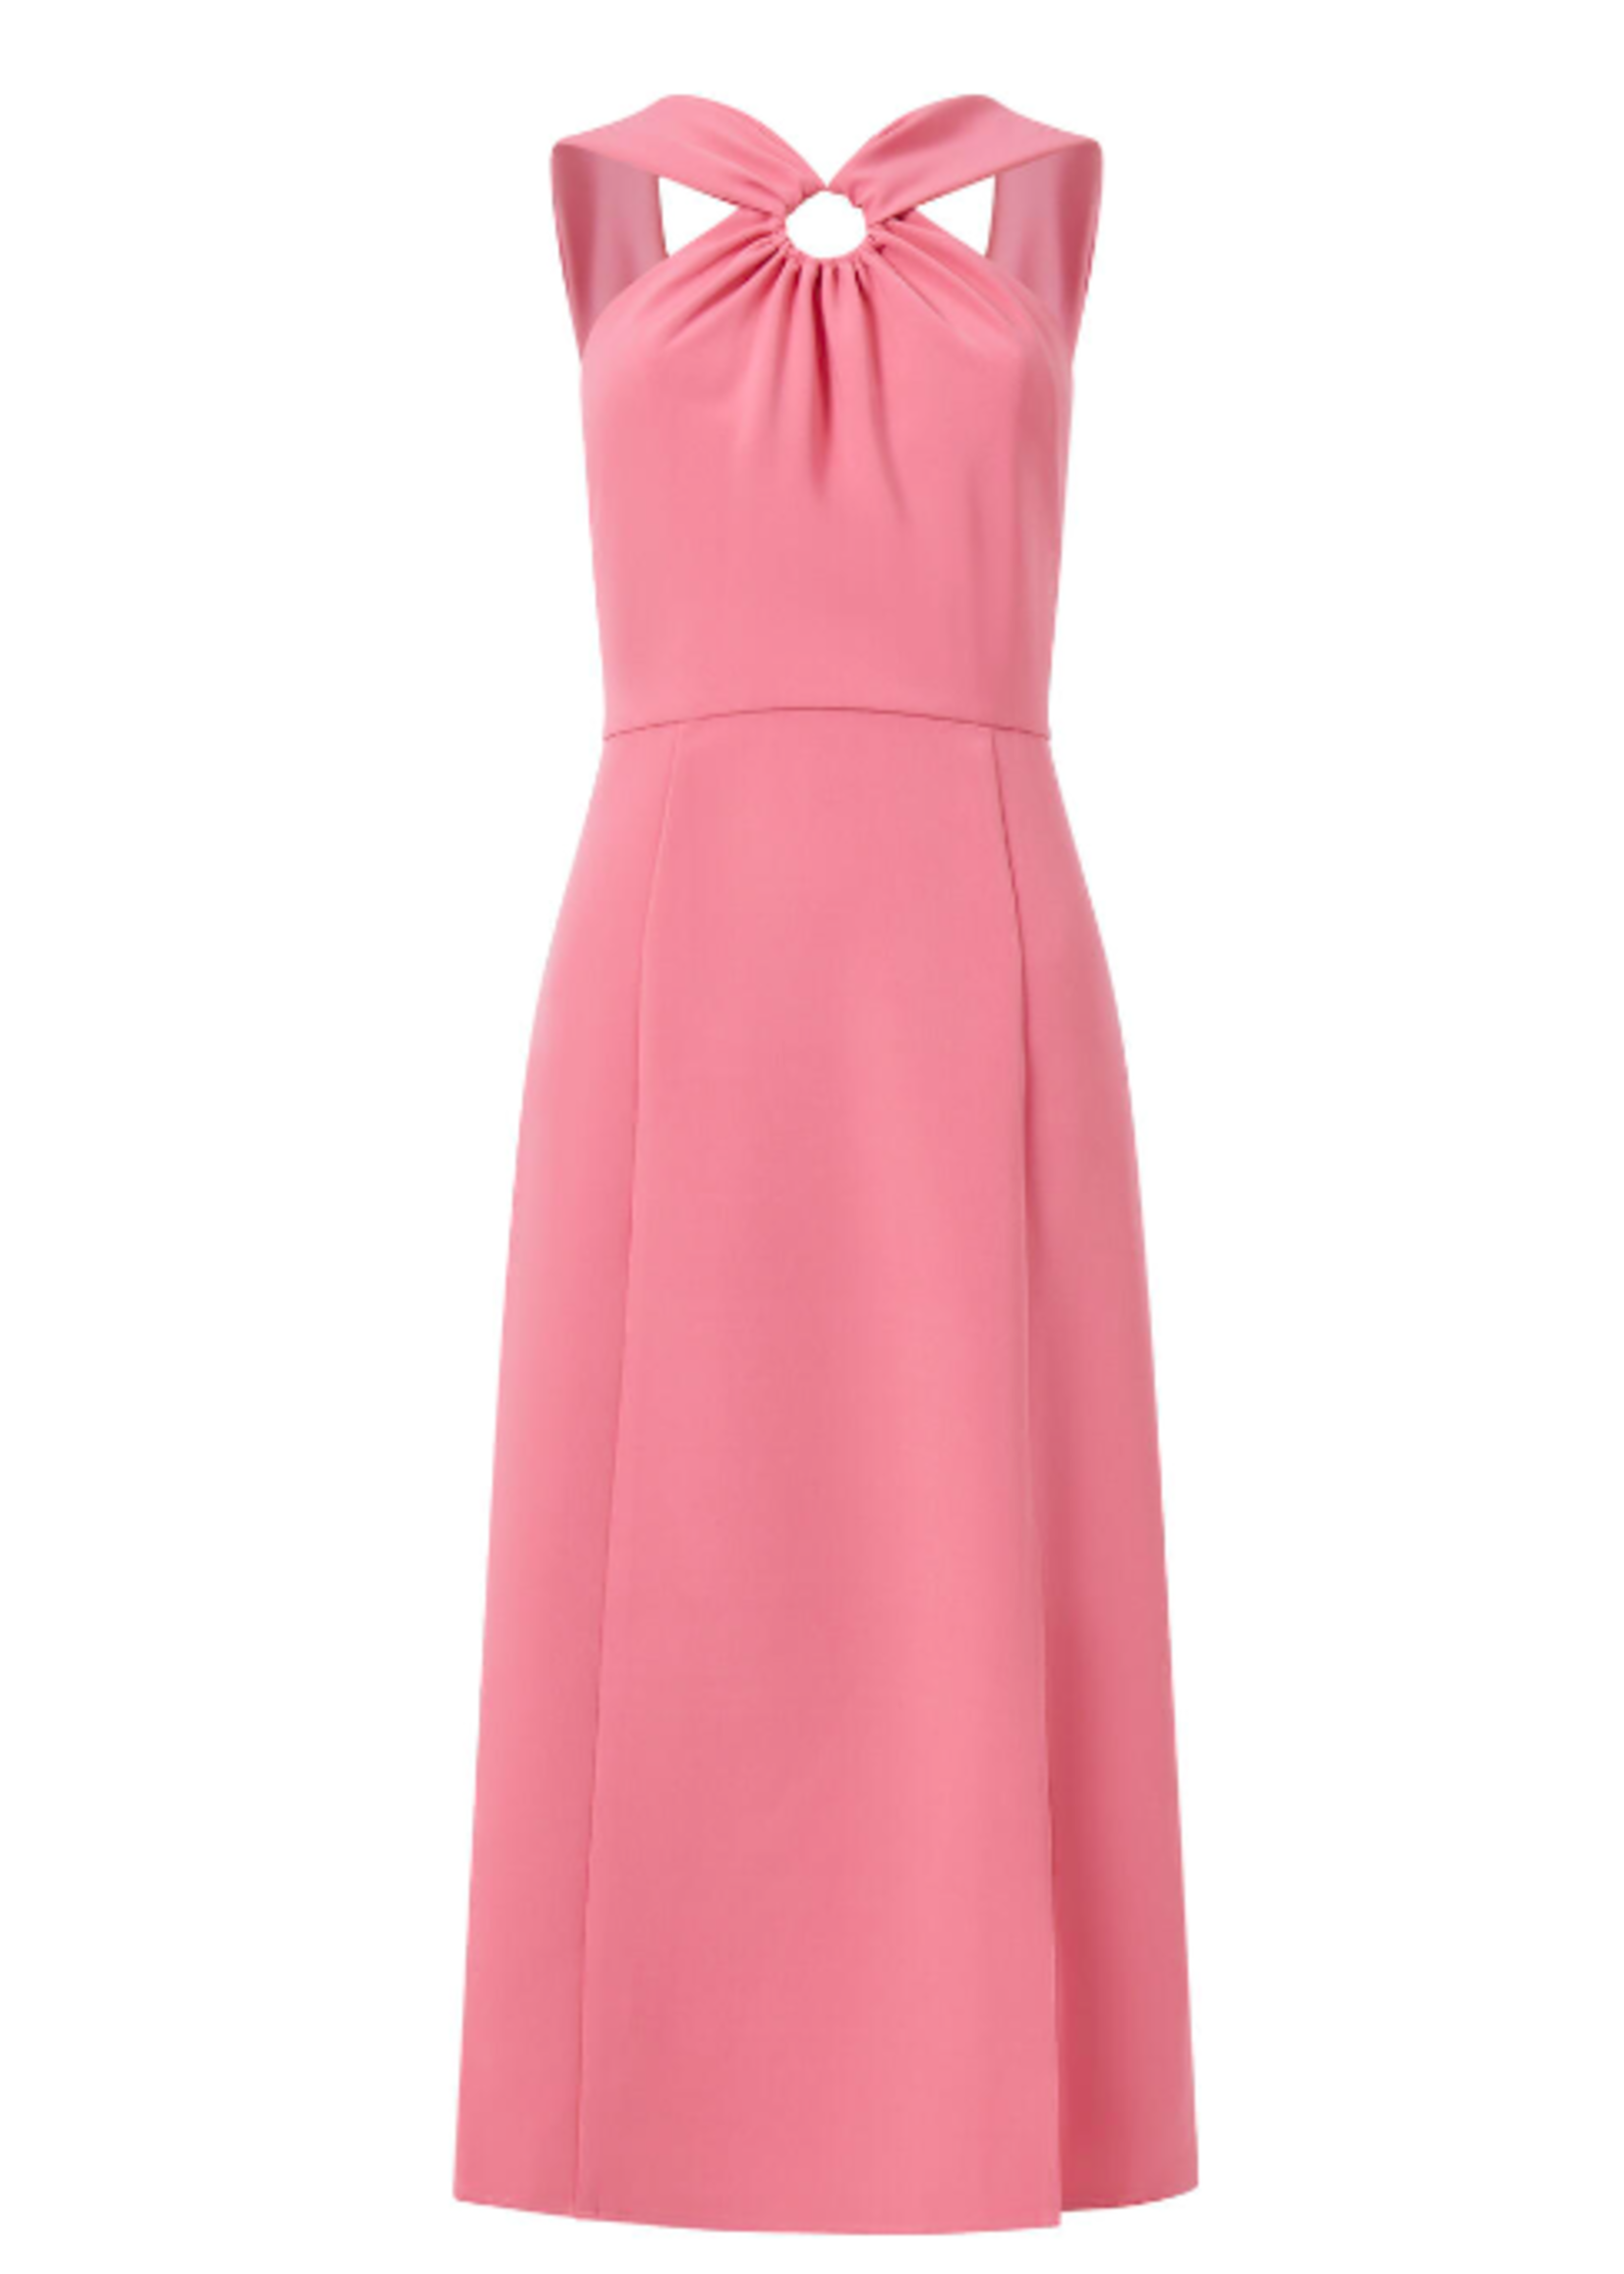 French Connection Echo Rec Crepe Ring Midi Dress